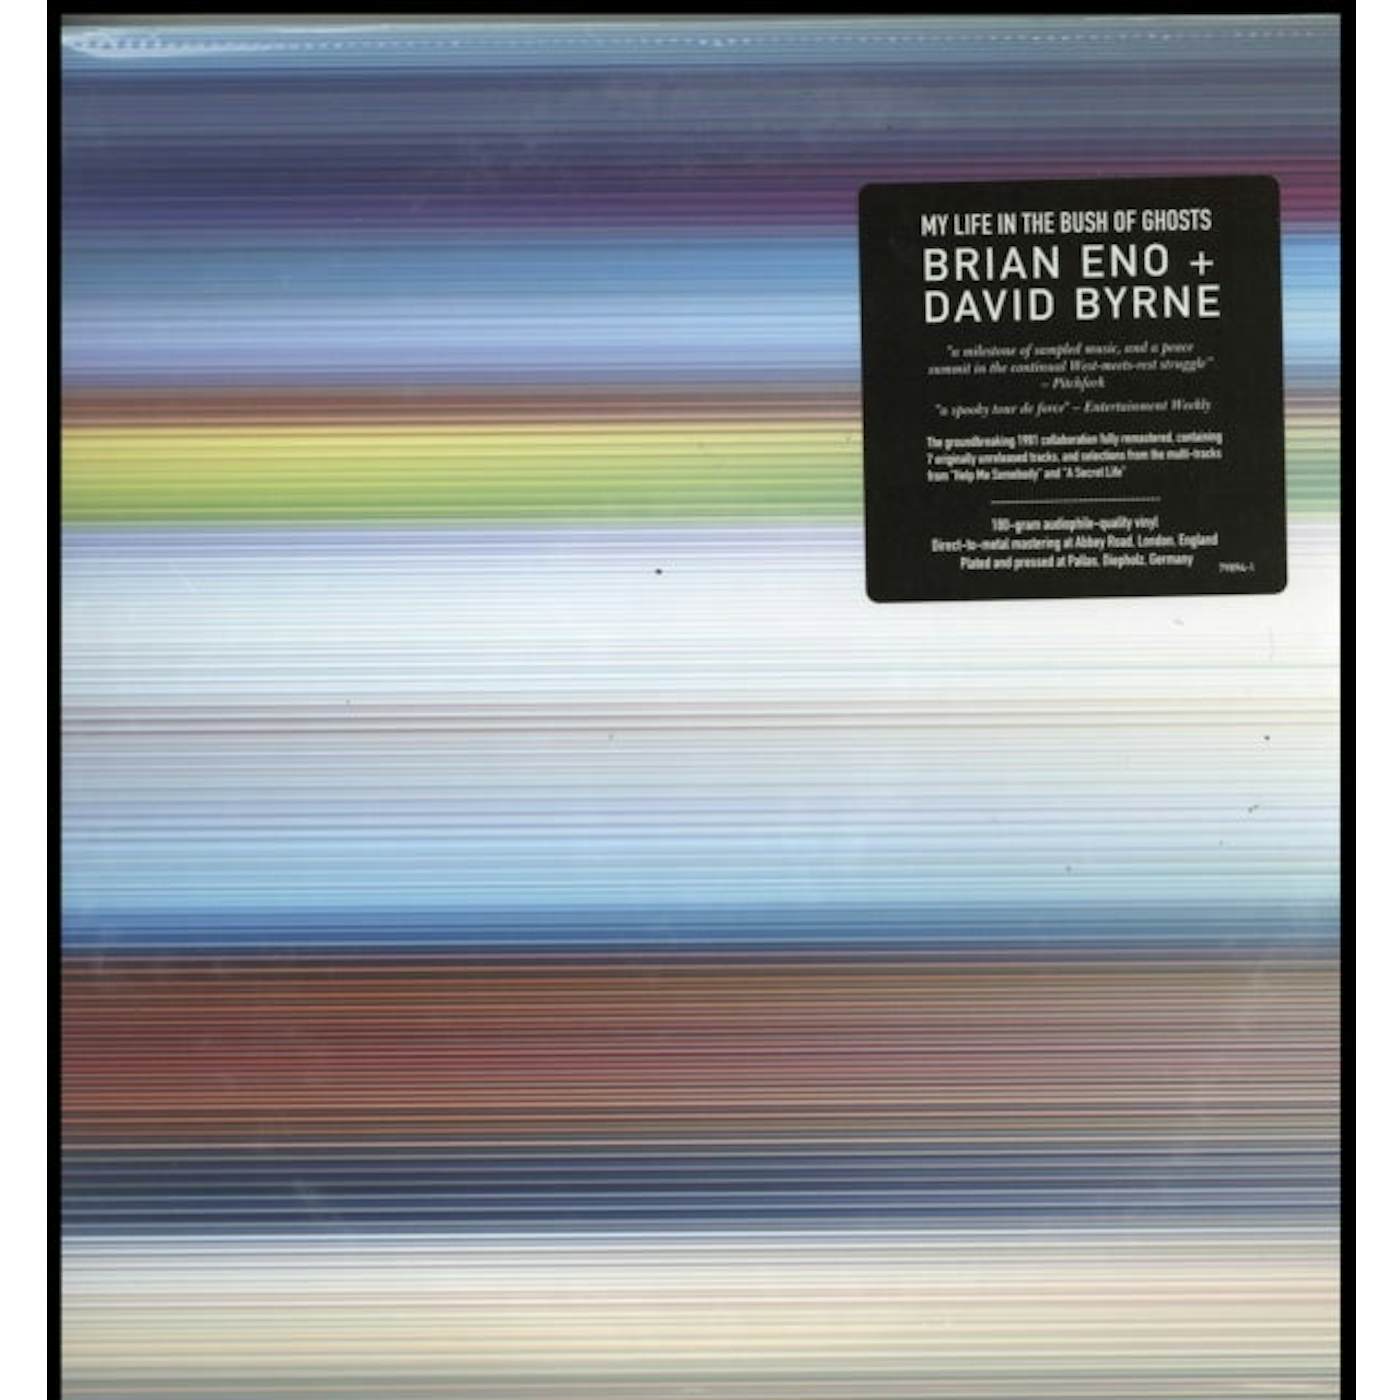 Brian Eno LP Vinyl Record - My Life In The Bush Of Ghosts